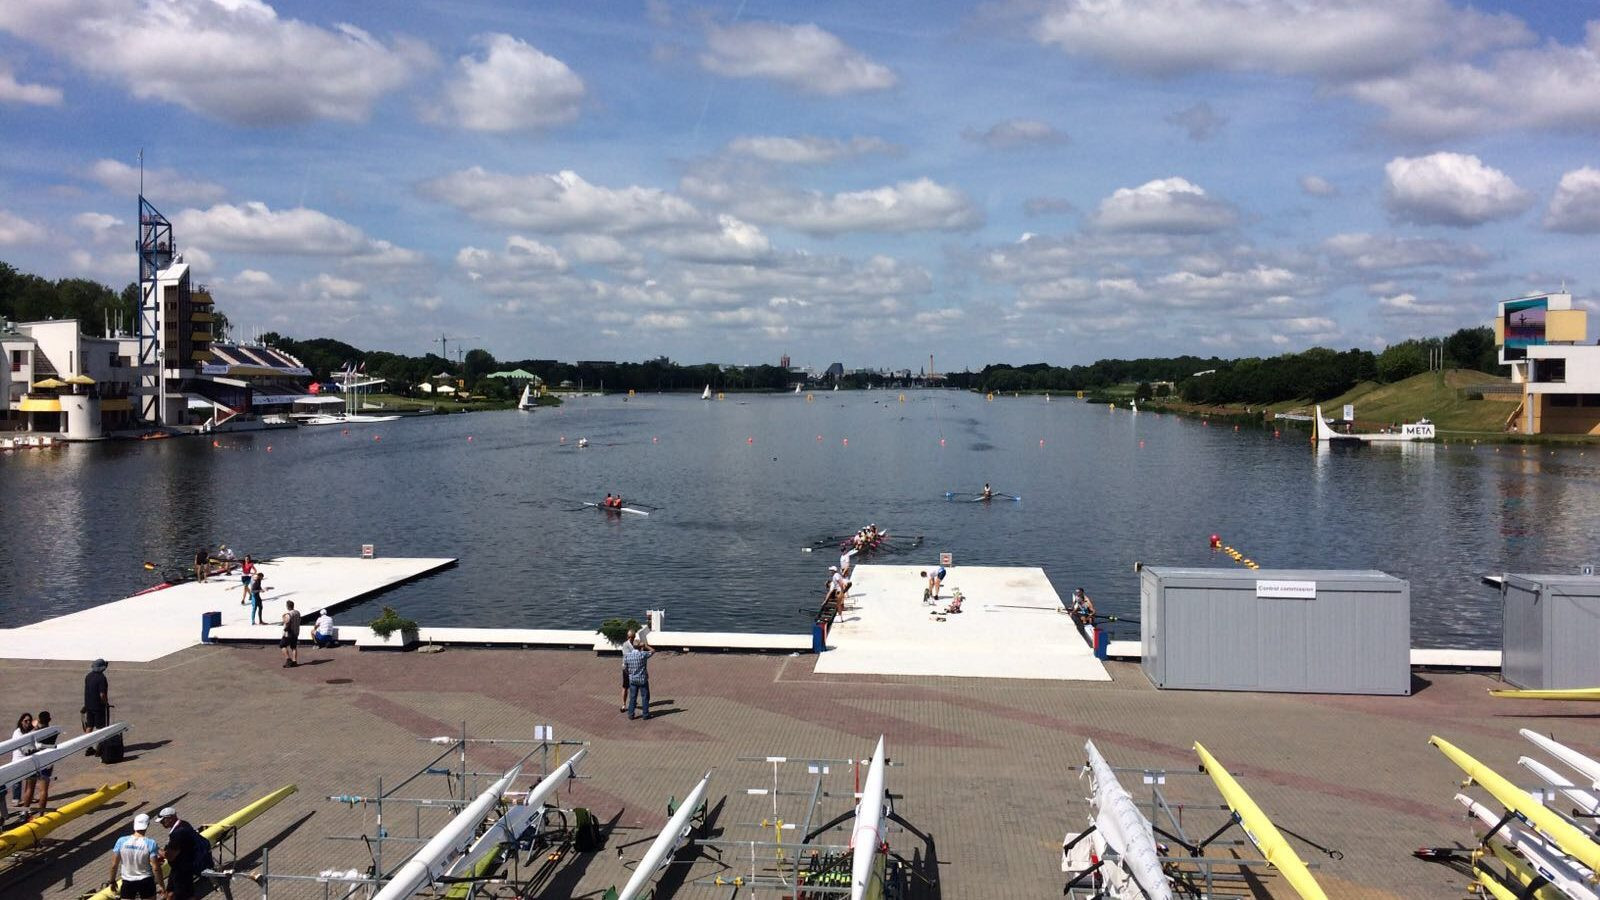 More than 500 athletes to compete at European Rowing Championships 